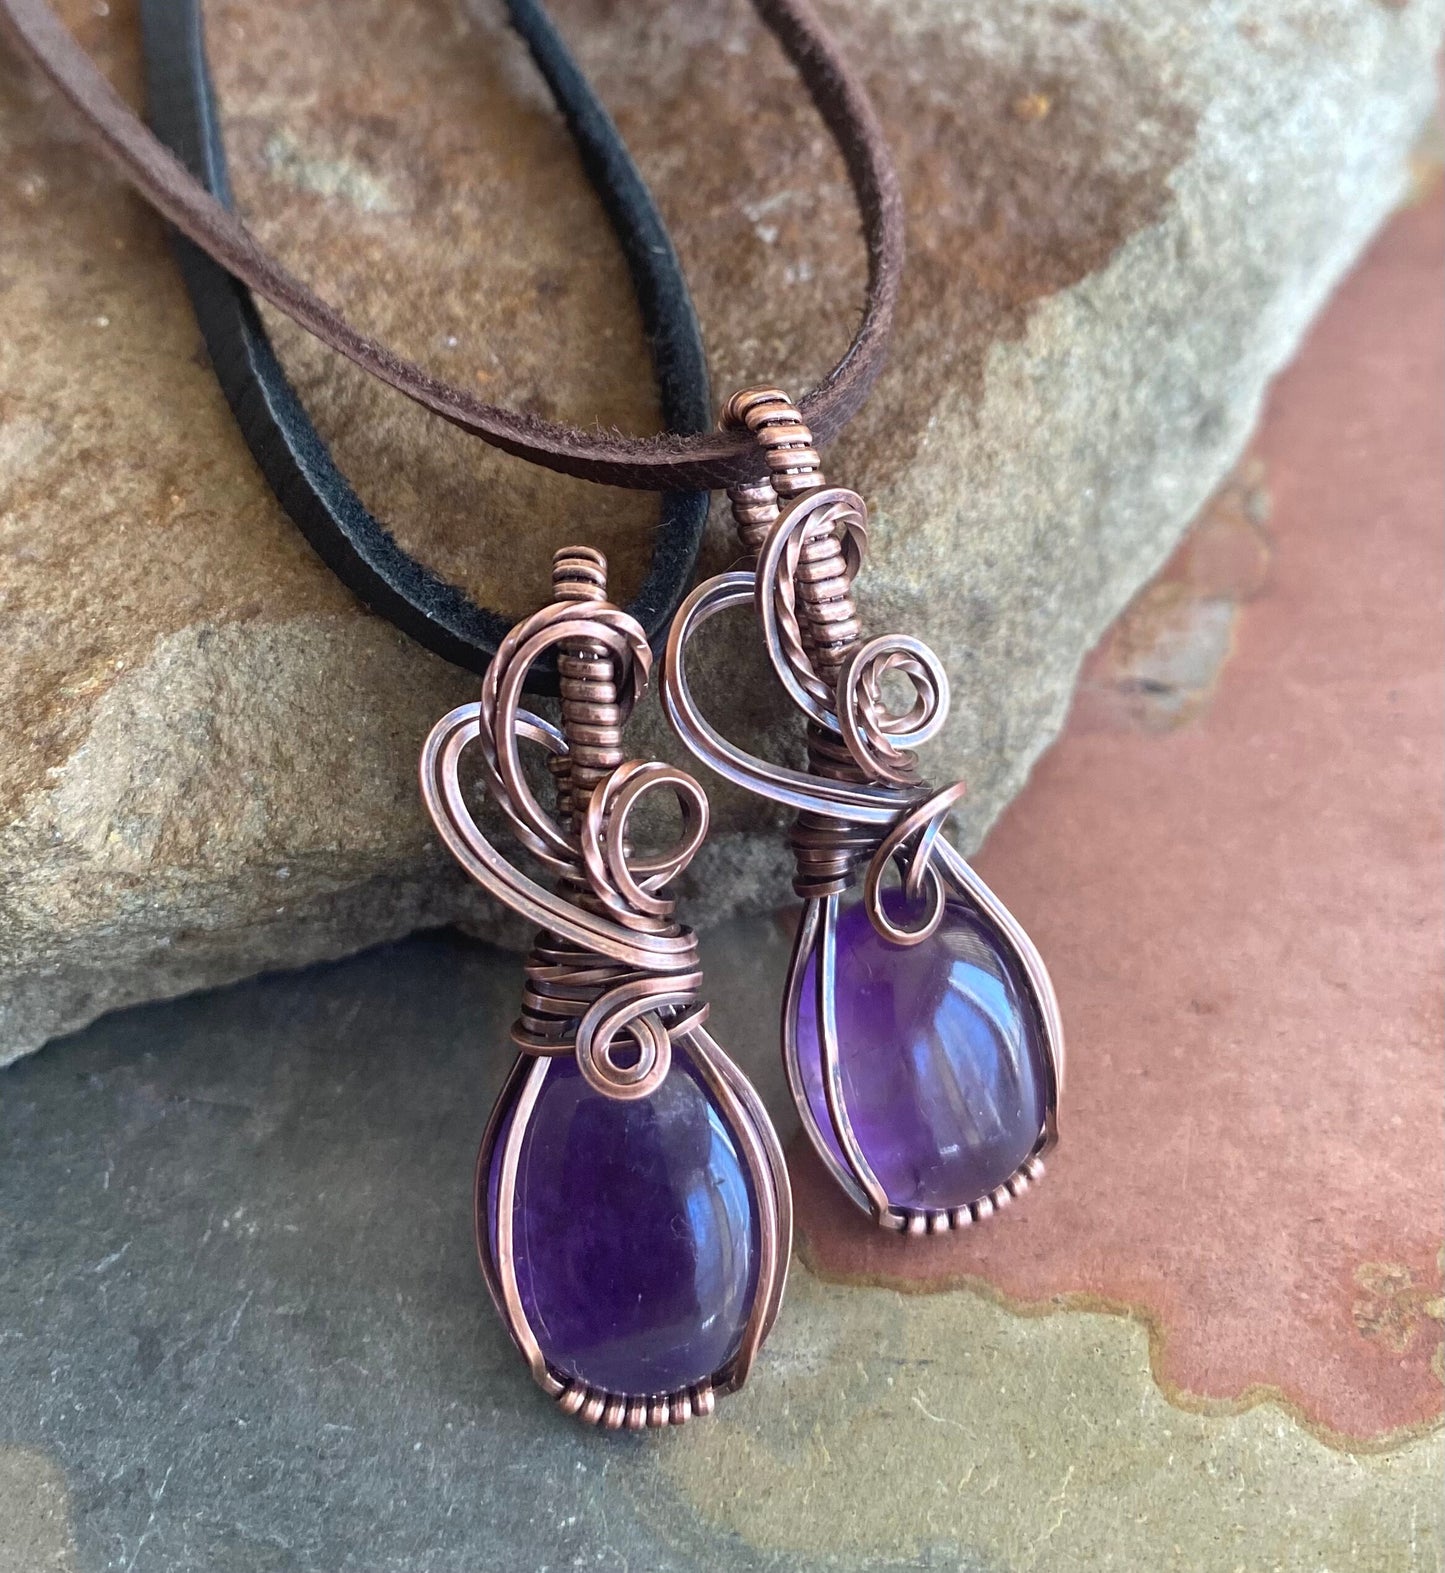 Amethyst Necklace,Wire Wrapped Amethyst Necklace in Antiqued Copper,Wire wrapped Raw Amethyst Necklace, February Birthstone, Valentine Gift